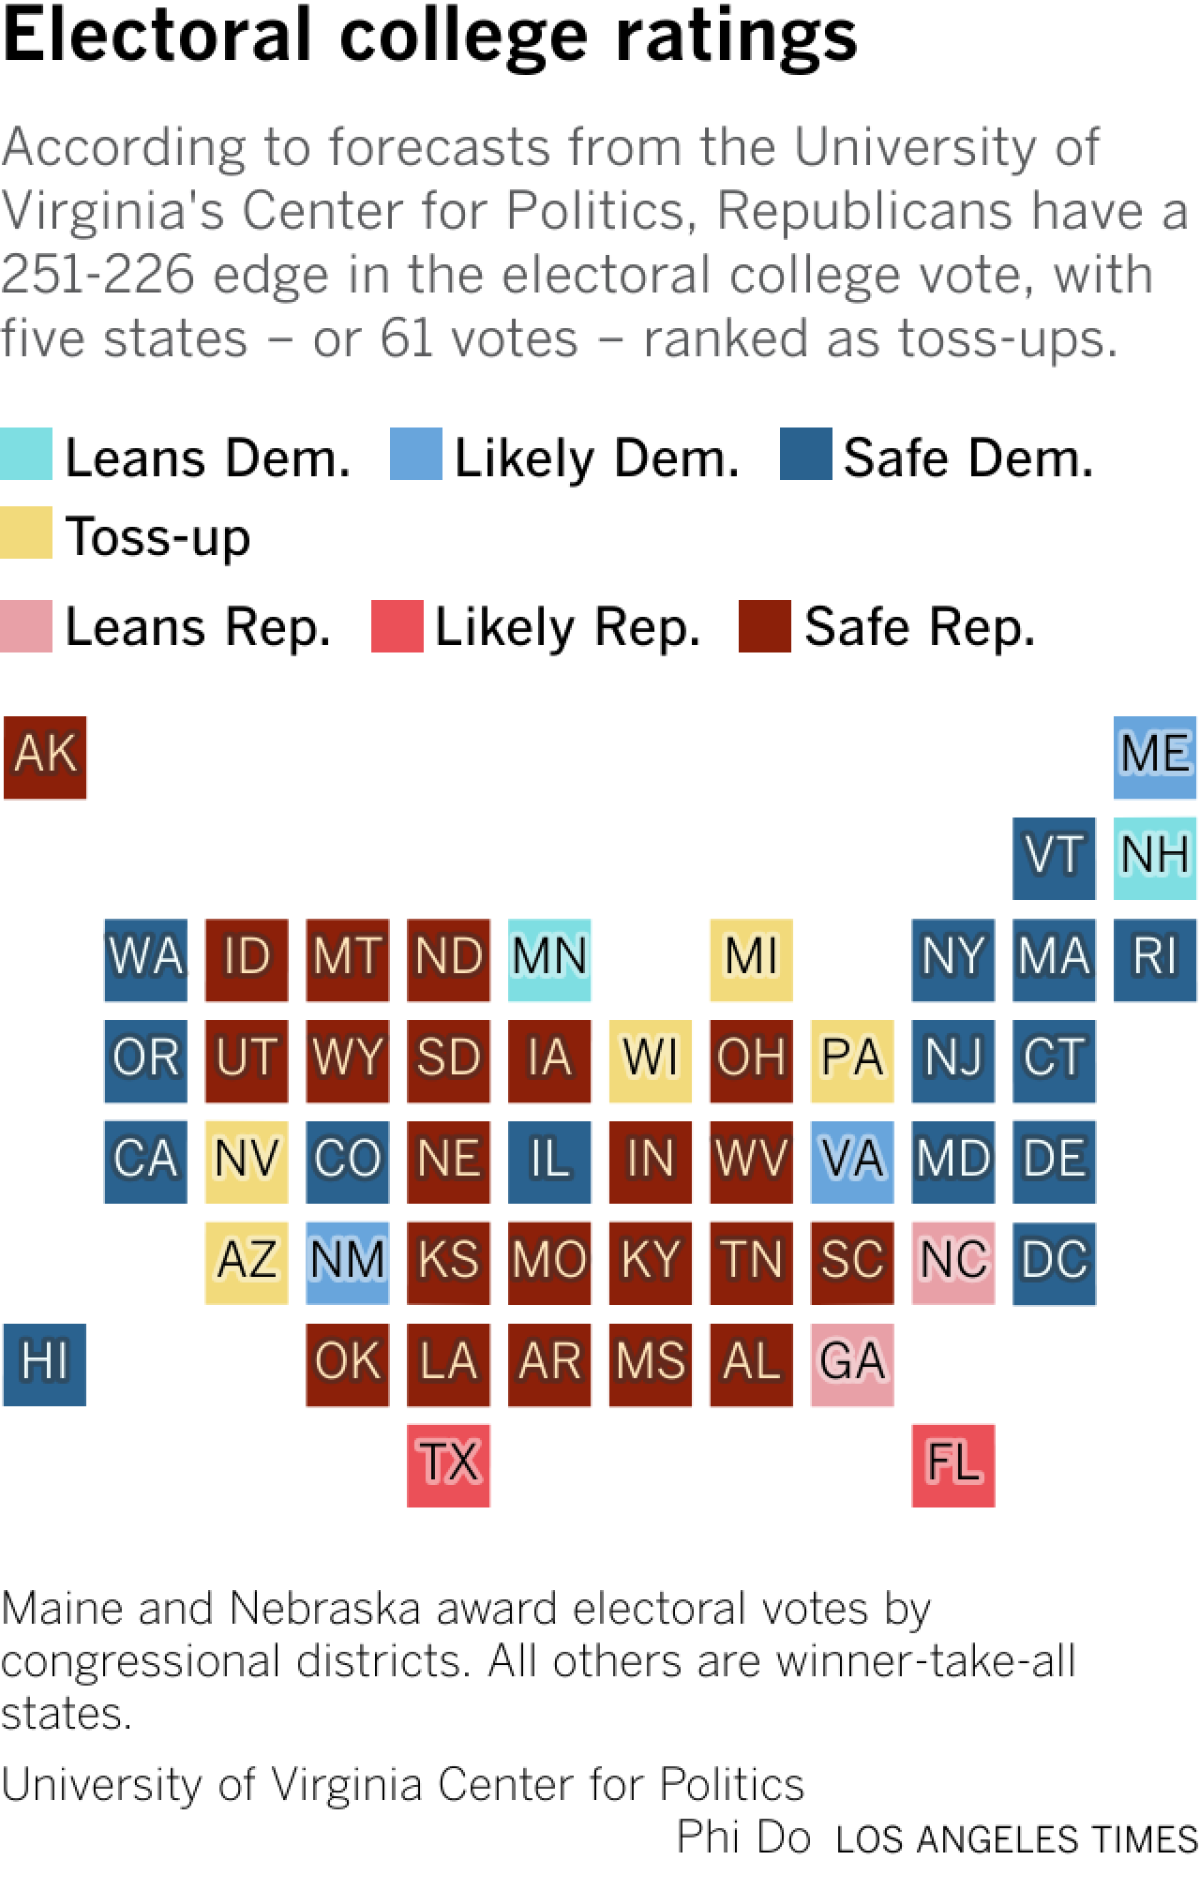 Grid cartogram showing how the "Crystal Ball" newsletter rates where states' delegates are leaning